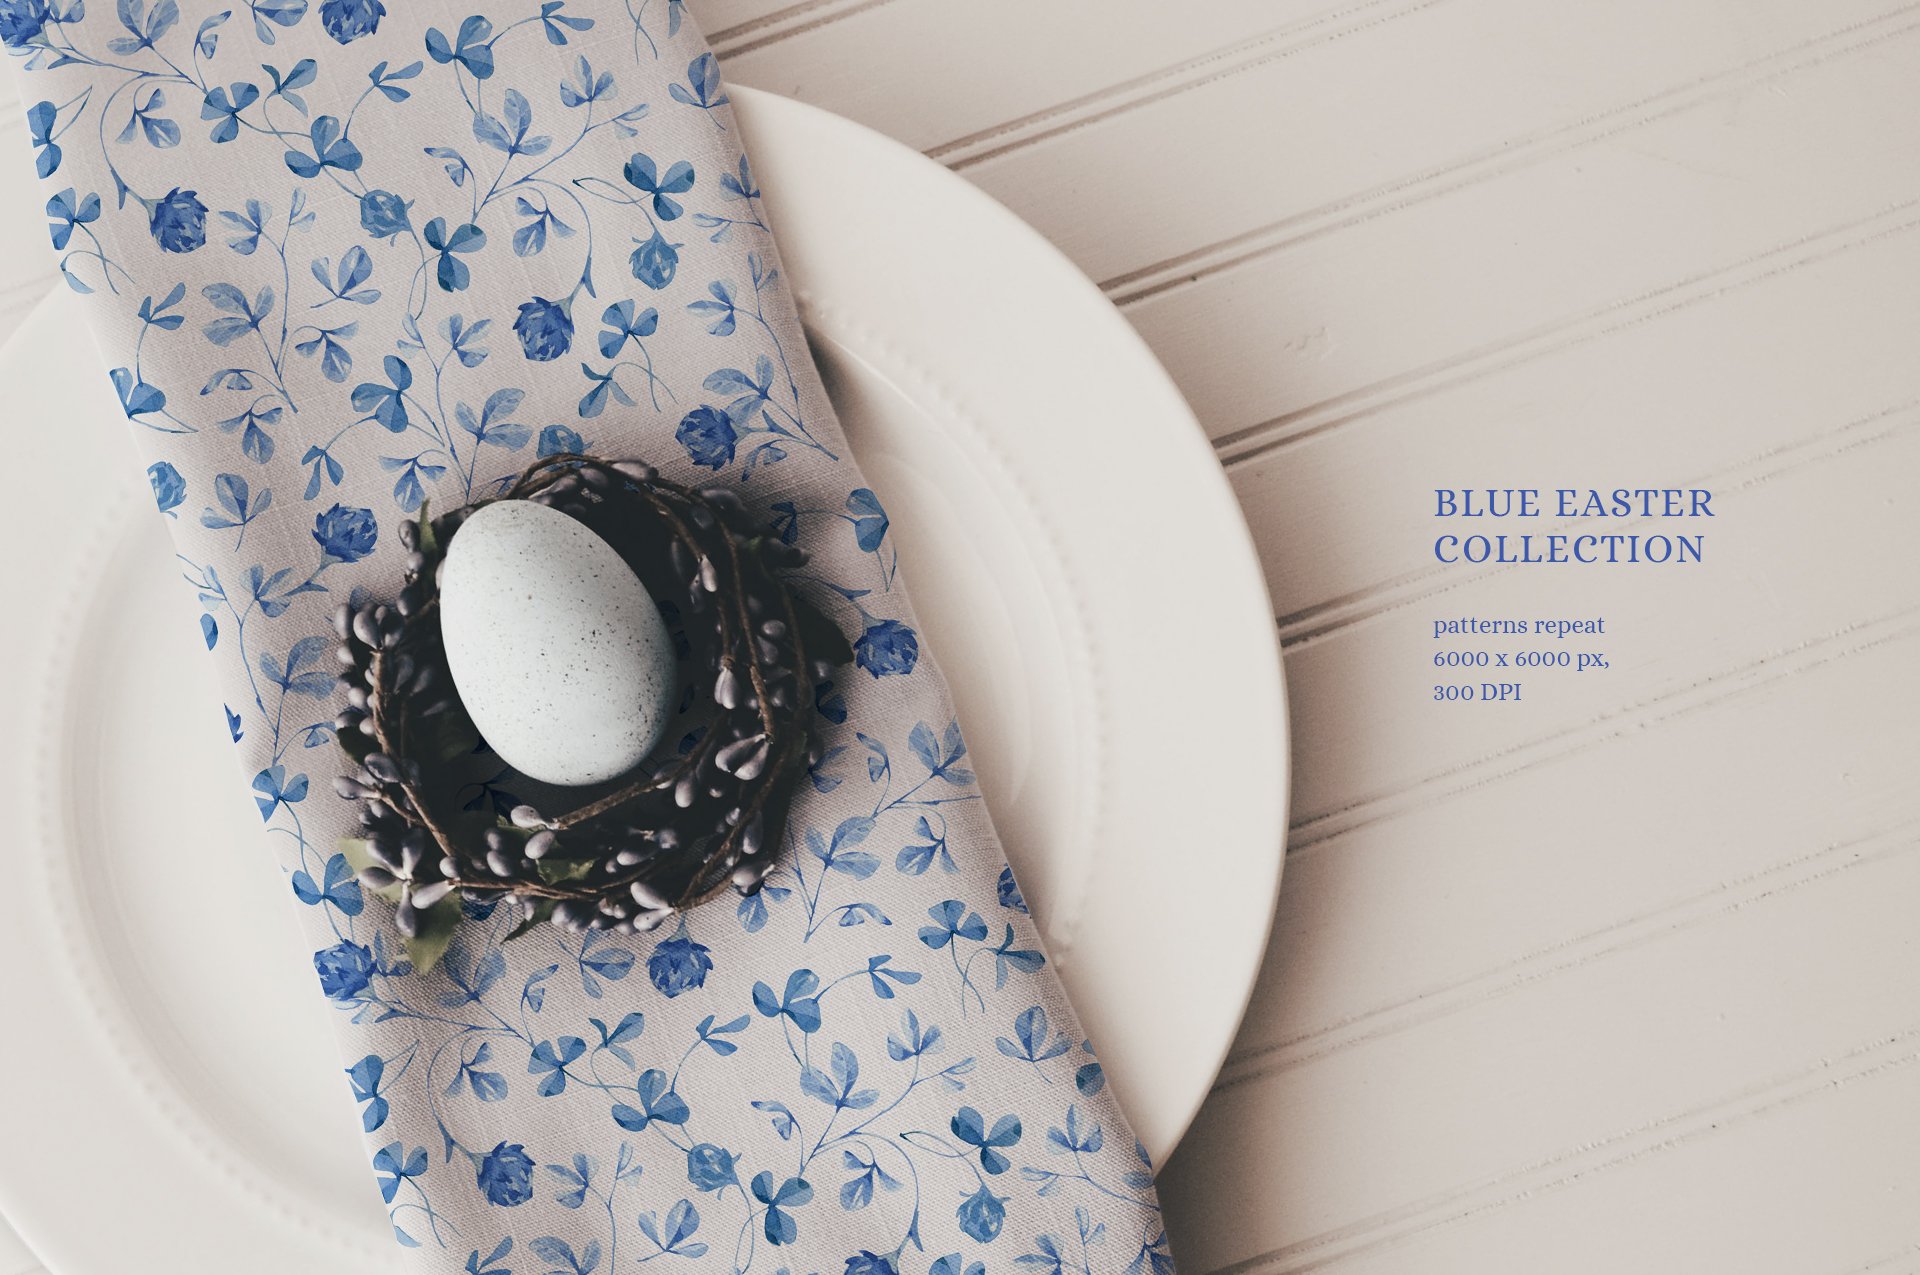 Perfect blue prints for your Easter table.